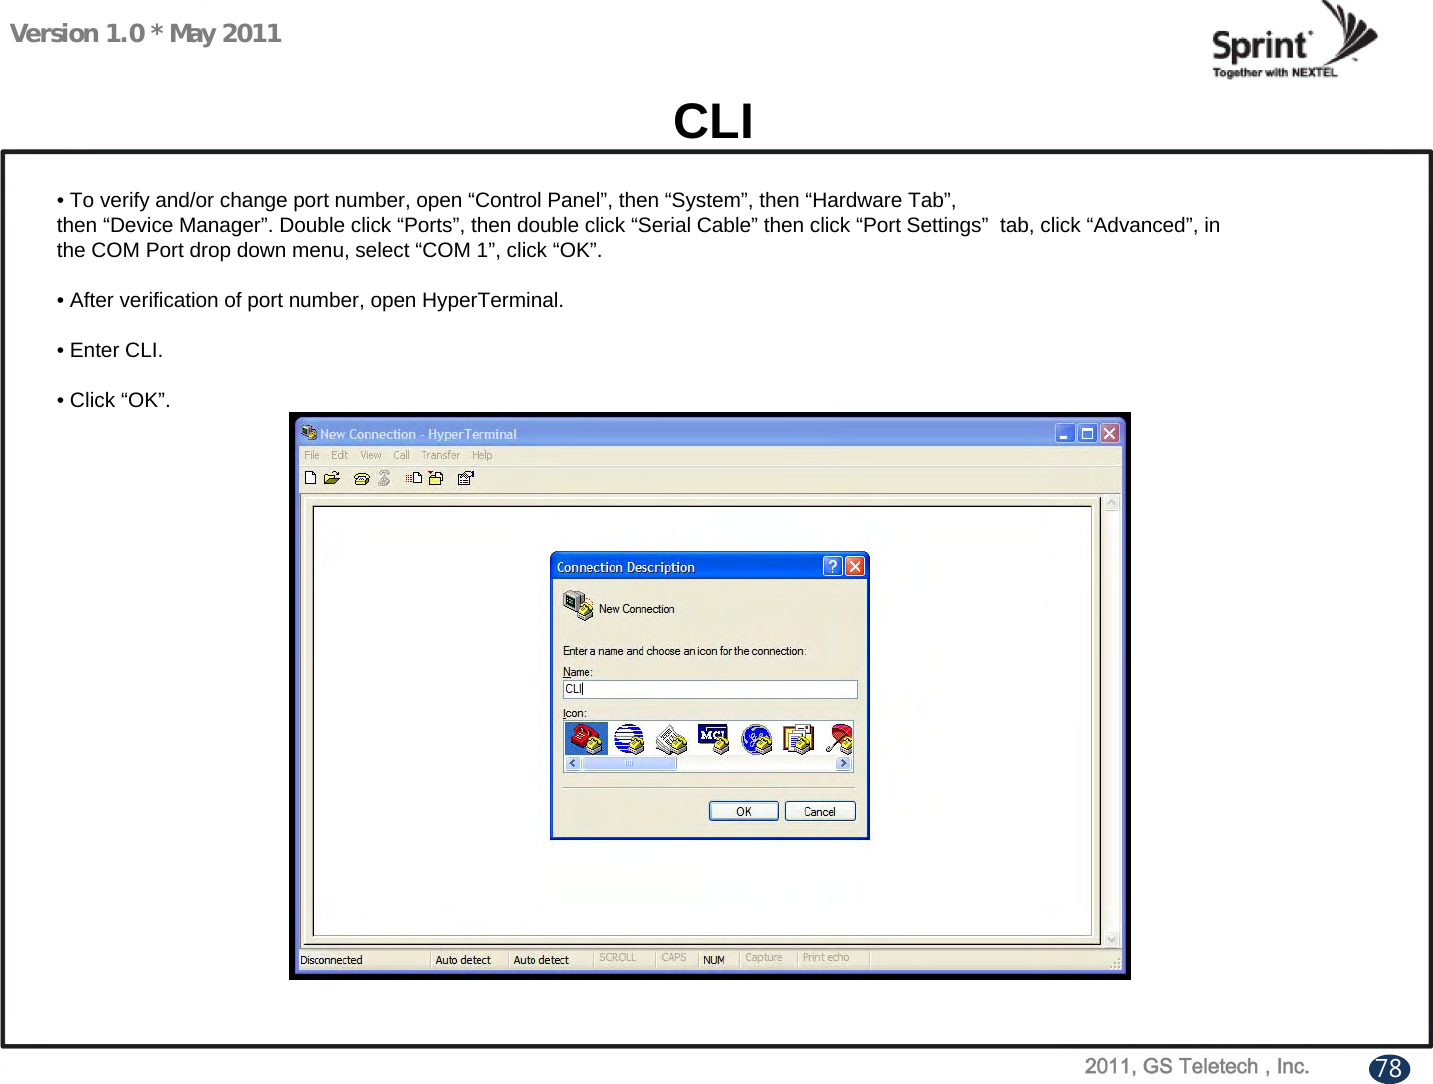 Version 1.0 * May 2011CLI• To verify and/or change port number, open “Control Panel”, then “System”, then “Hardware Tab”,then “Device Manager”. Double click “Ports”, then double click “Serial Cable” then click “Port Settings” tab, click “Advanced”, in         the COM Port drop down menu, select “COM 1”, click “OK”.• After verification of port number, open HyperTerminal.• Enter CLI.• Click “OK”.78